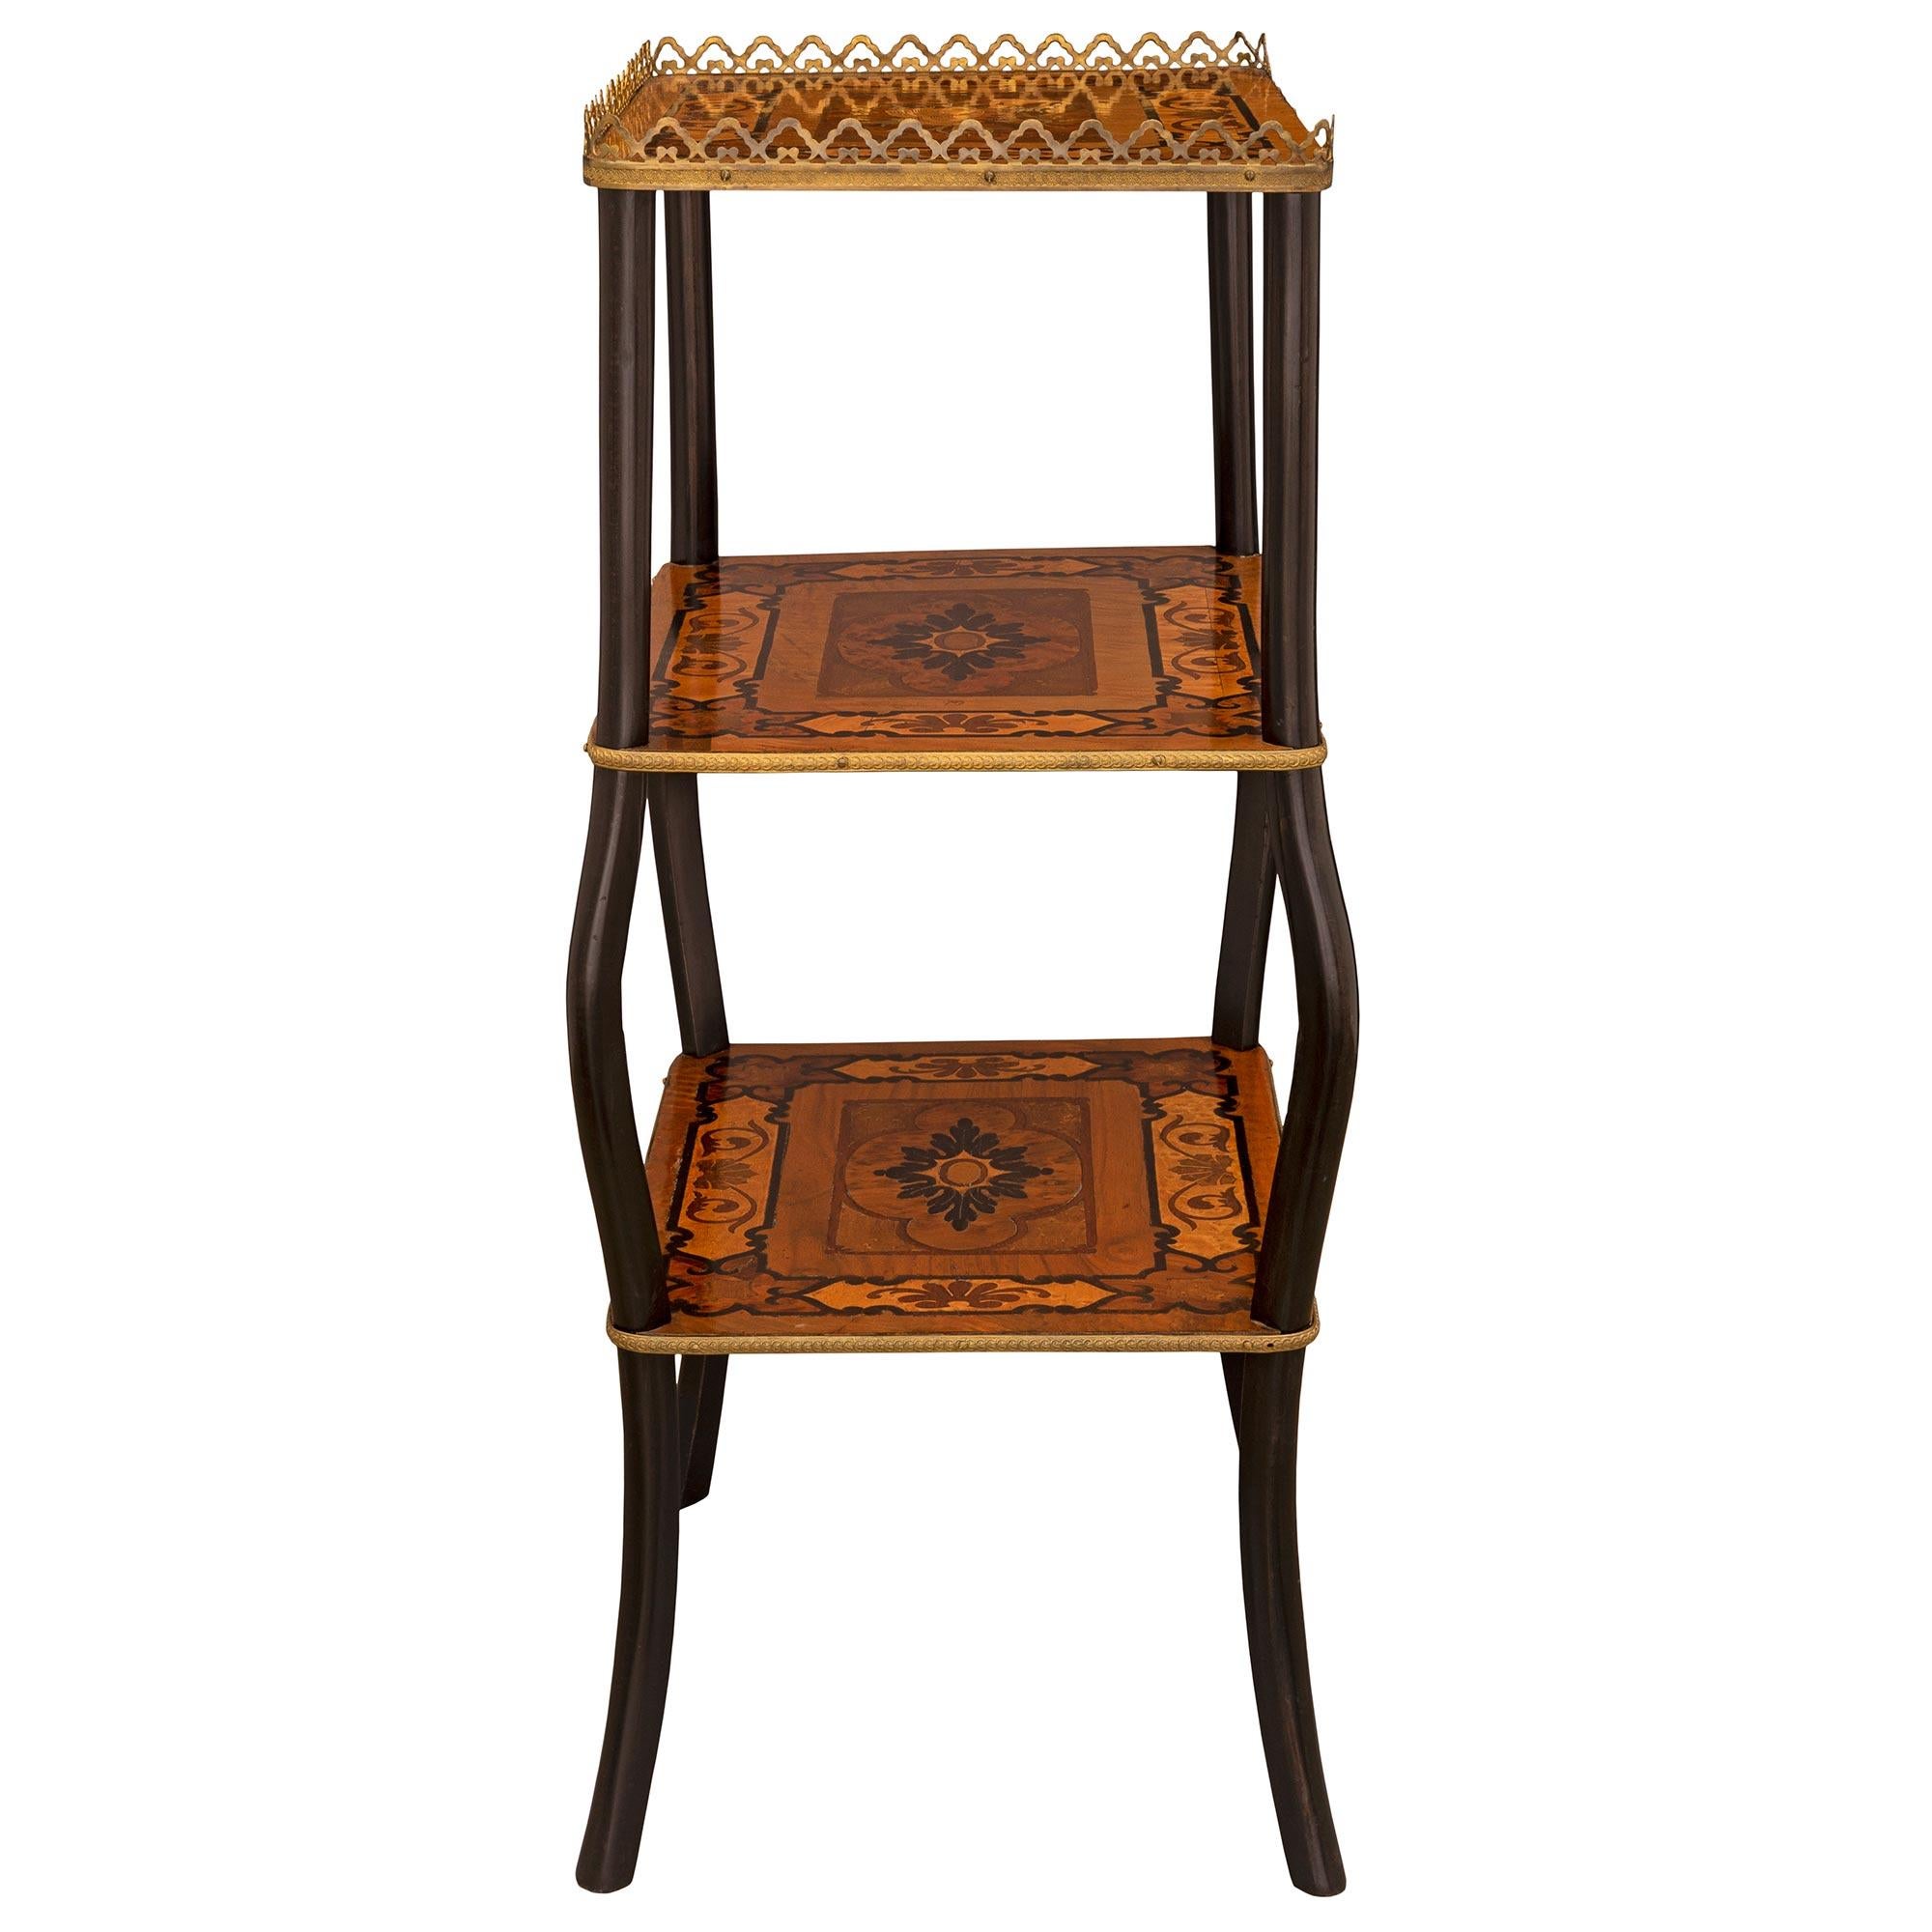 French 19th Century Napoleon III Period Ebony, Exotic Wood, & Ormolu Side Table In Good Condition For Sale In West Palm Beach, FL